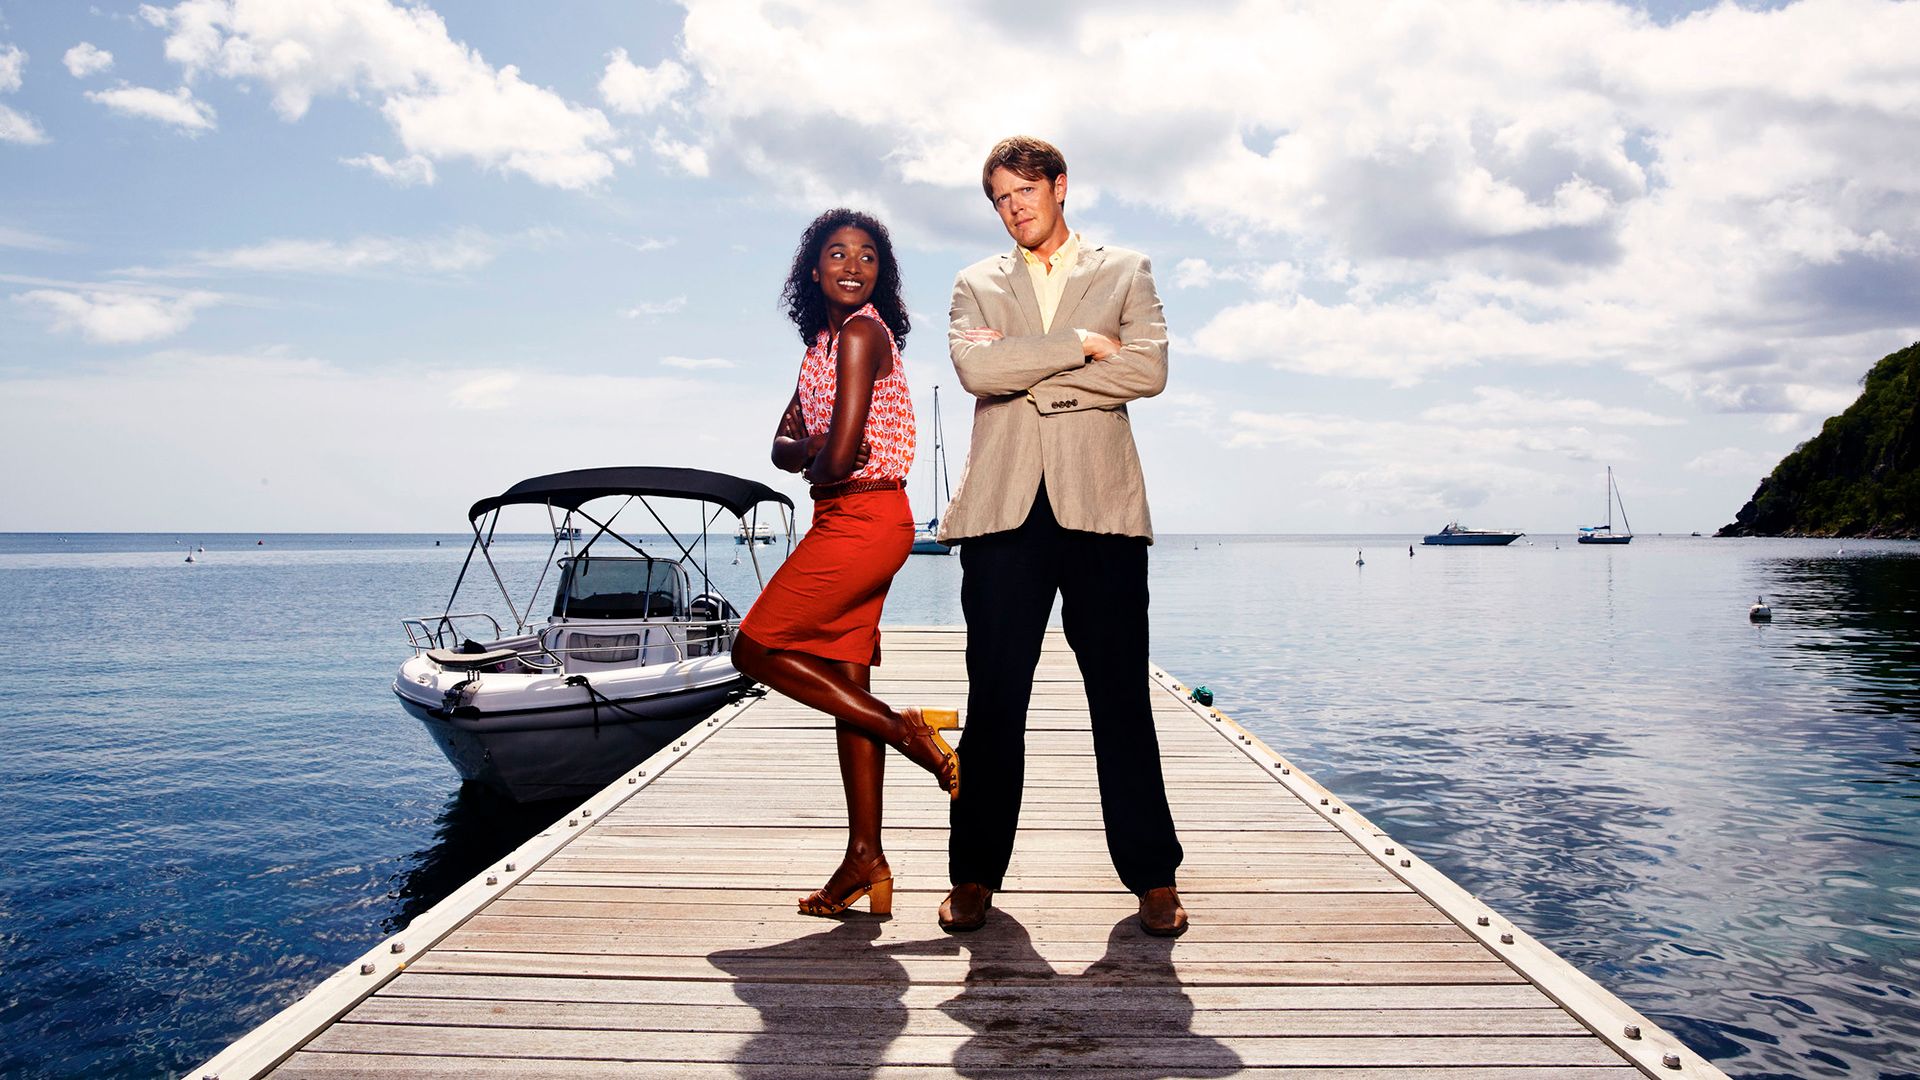 Death in Paradise background